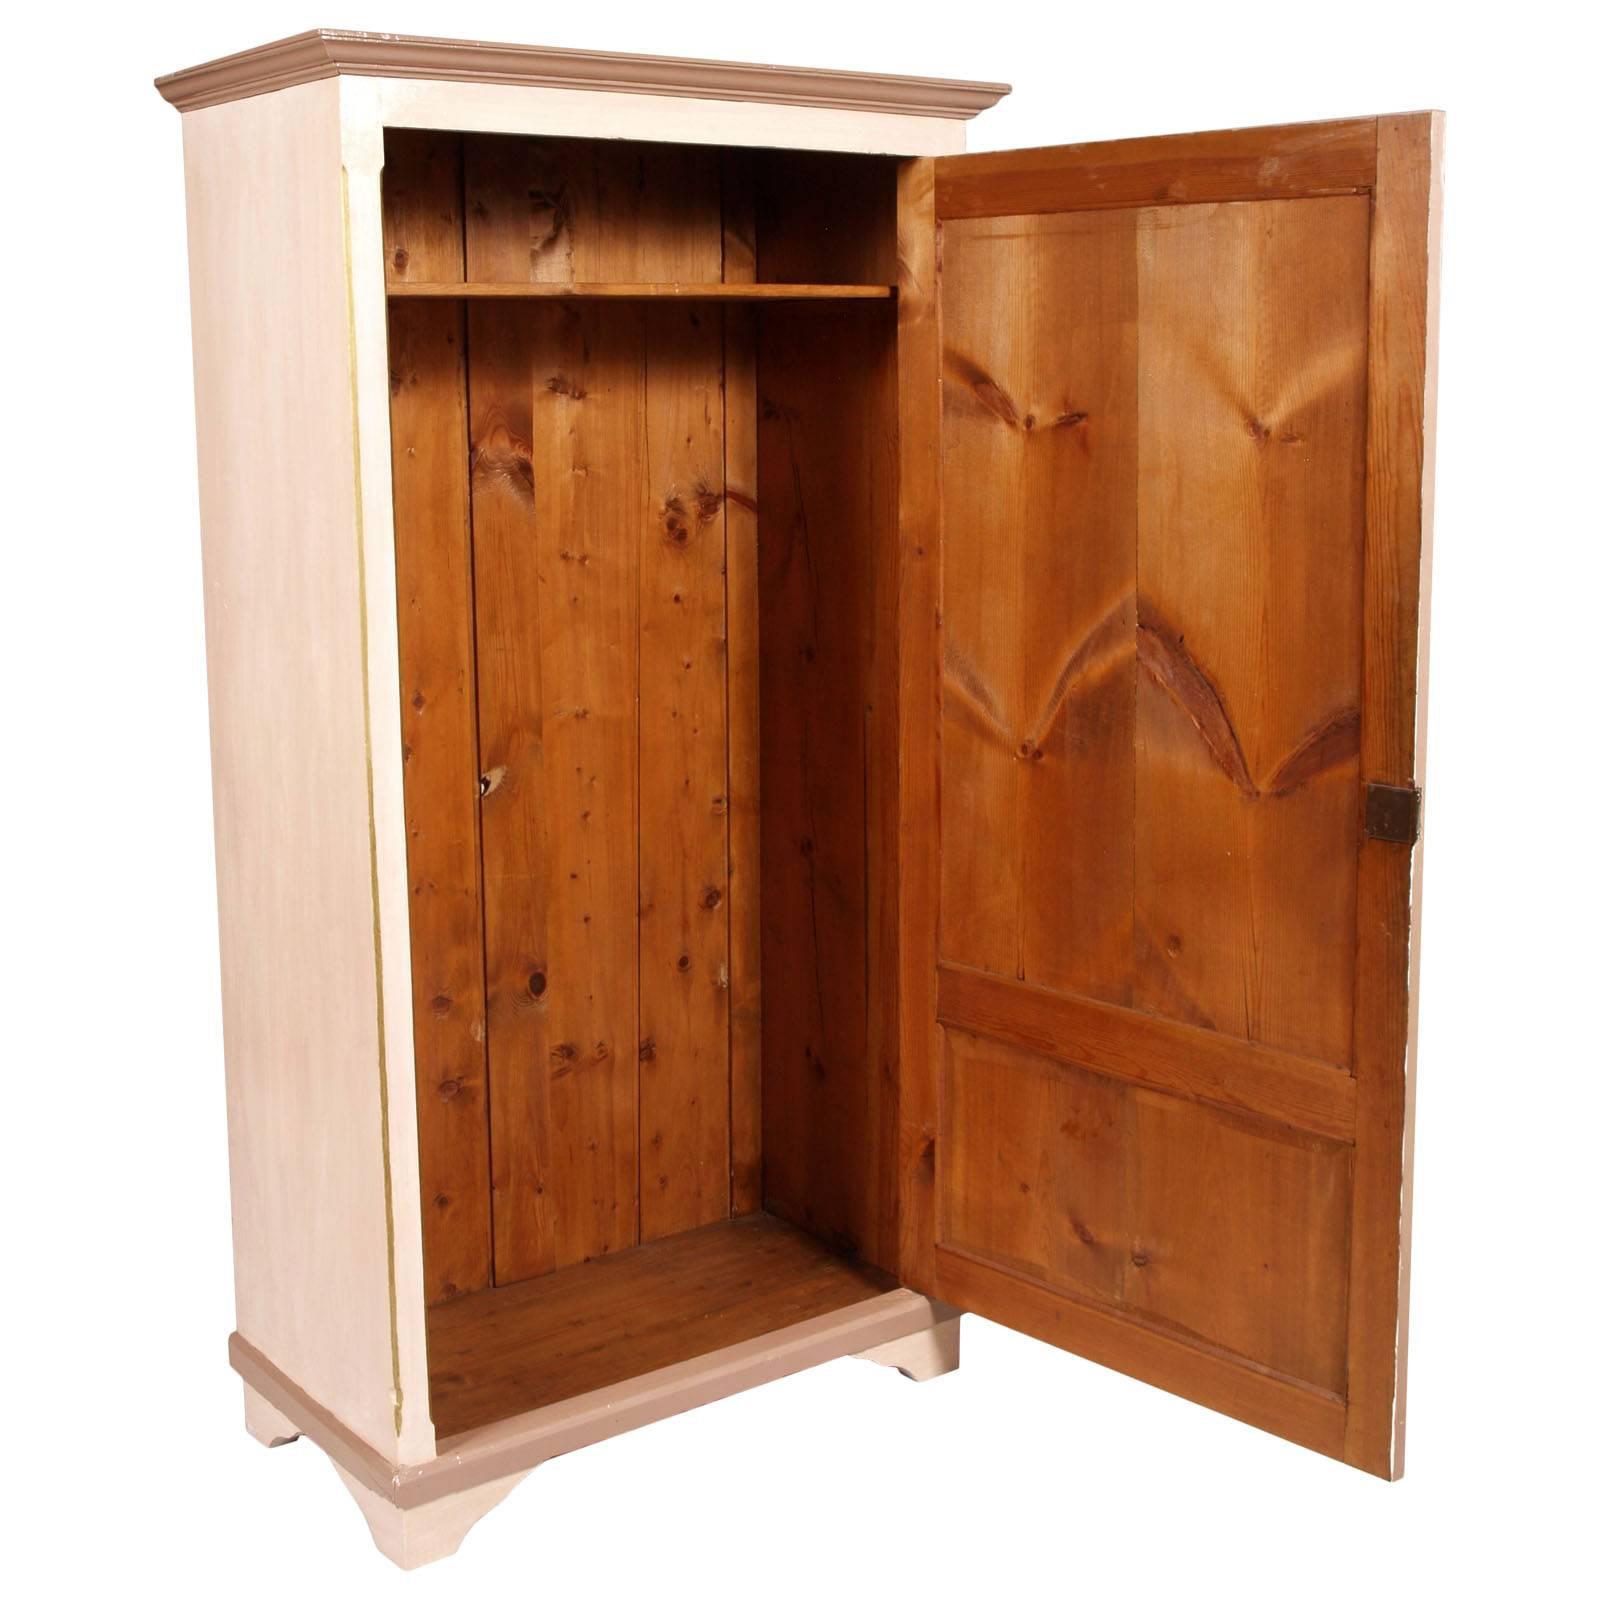 1890s antique painted Provencal library cabinet, cupboard, wardrobe in massive wood, restored and wax polished.
The lacquer in shades of gray purplish are original and only retouched in parts.
In the inside, included in the price, we provide a